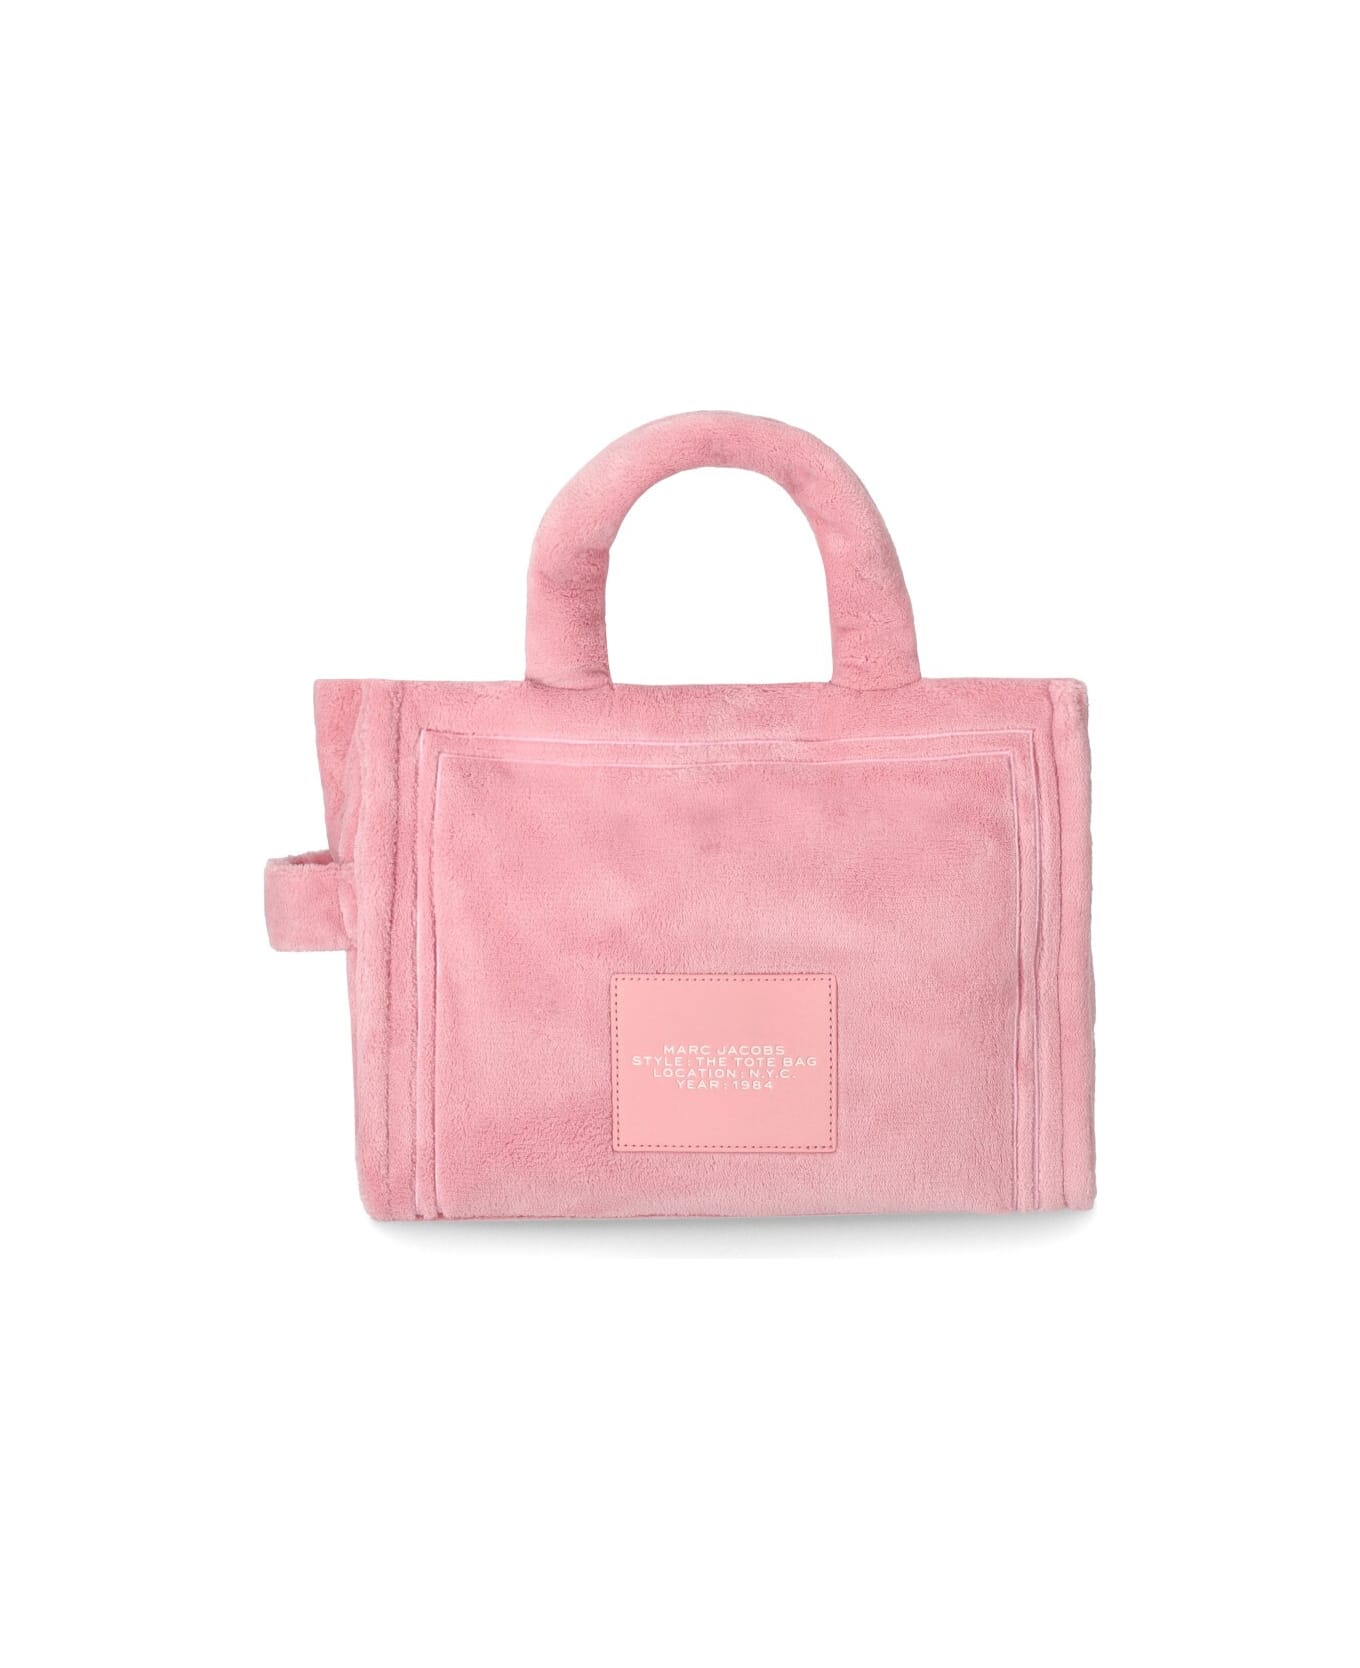 Marc Jacobs the terry small tote bag Pink - $475 (13% Off Retail